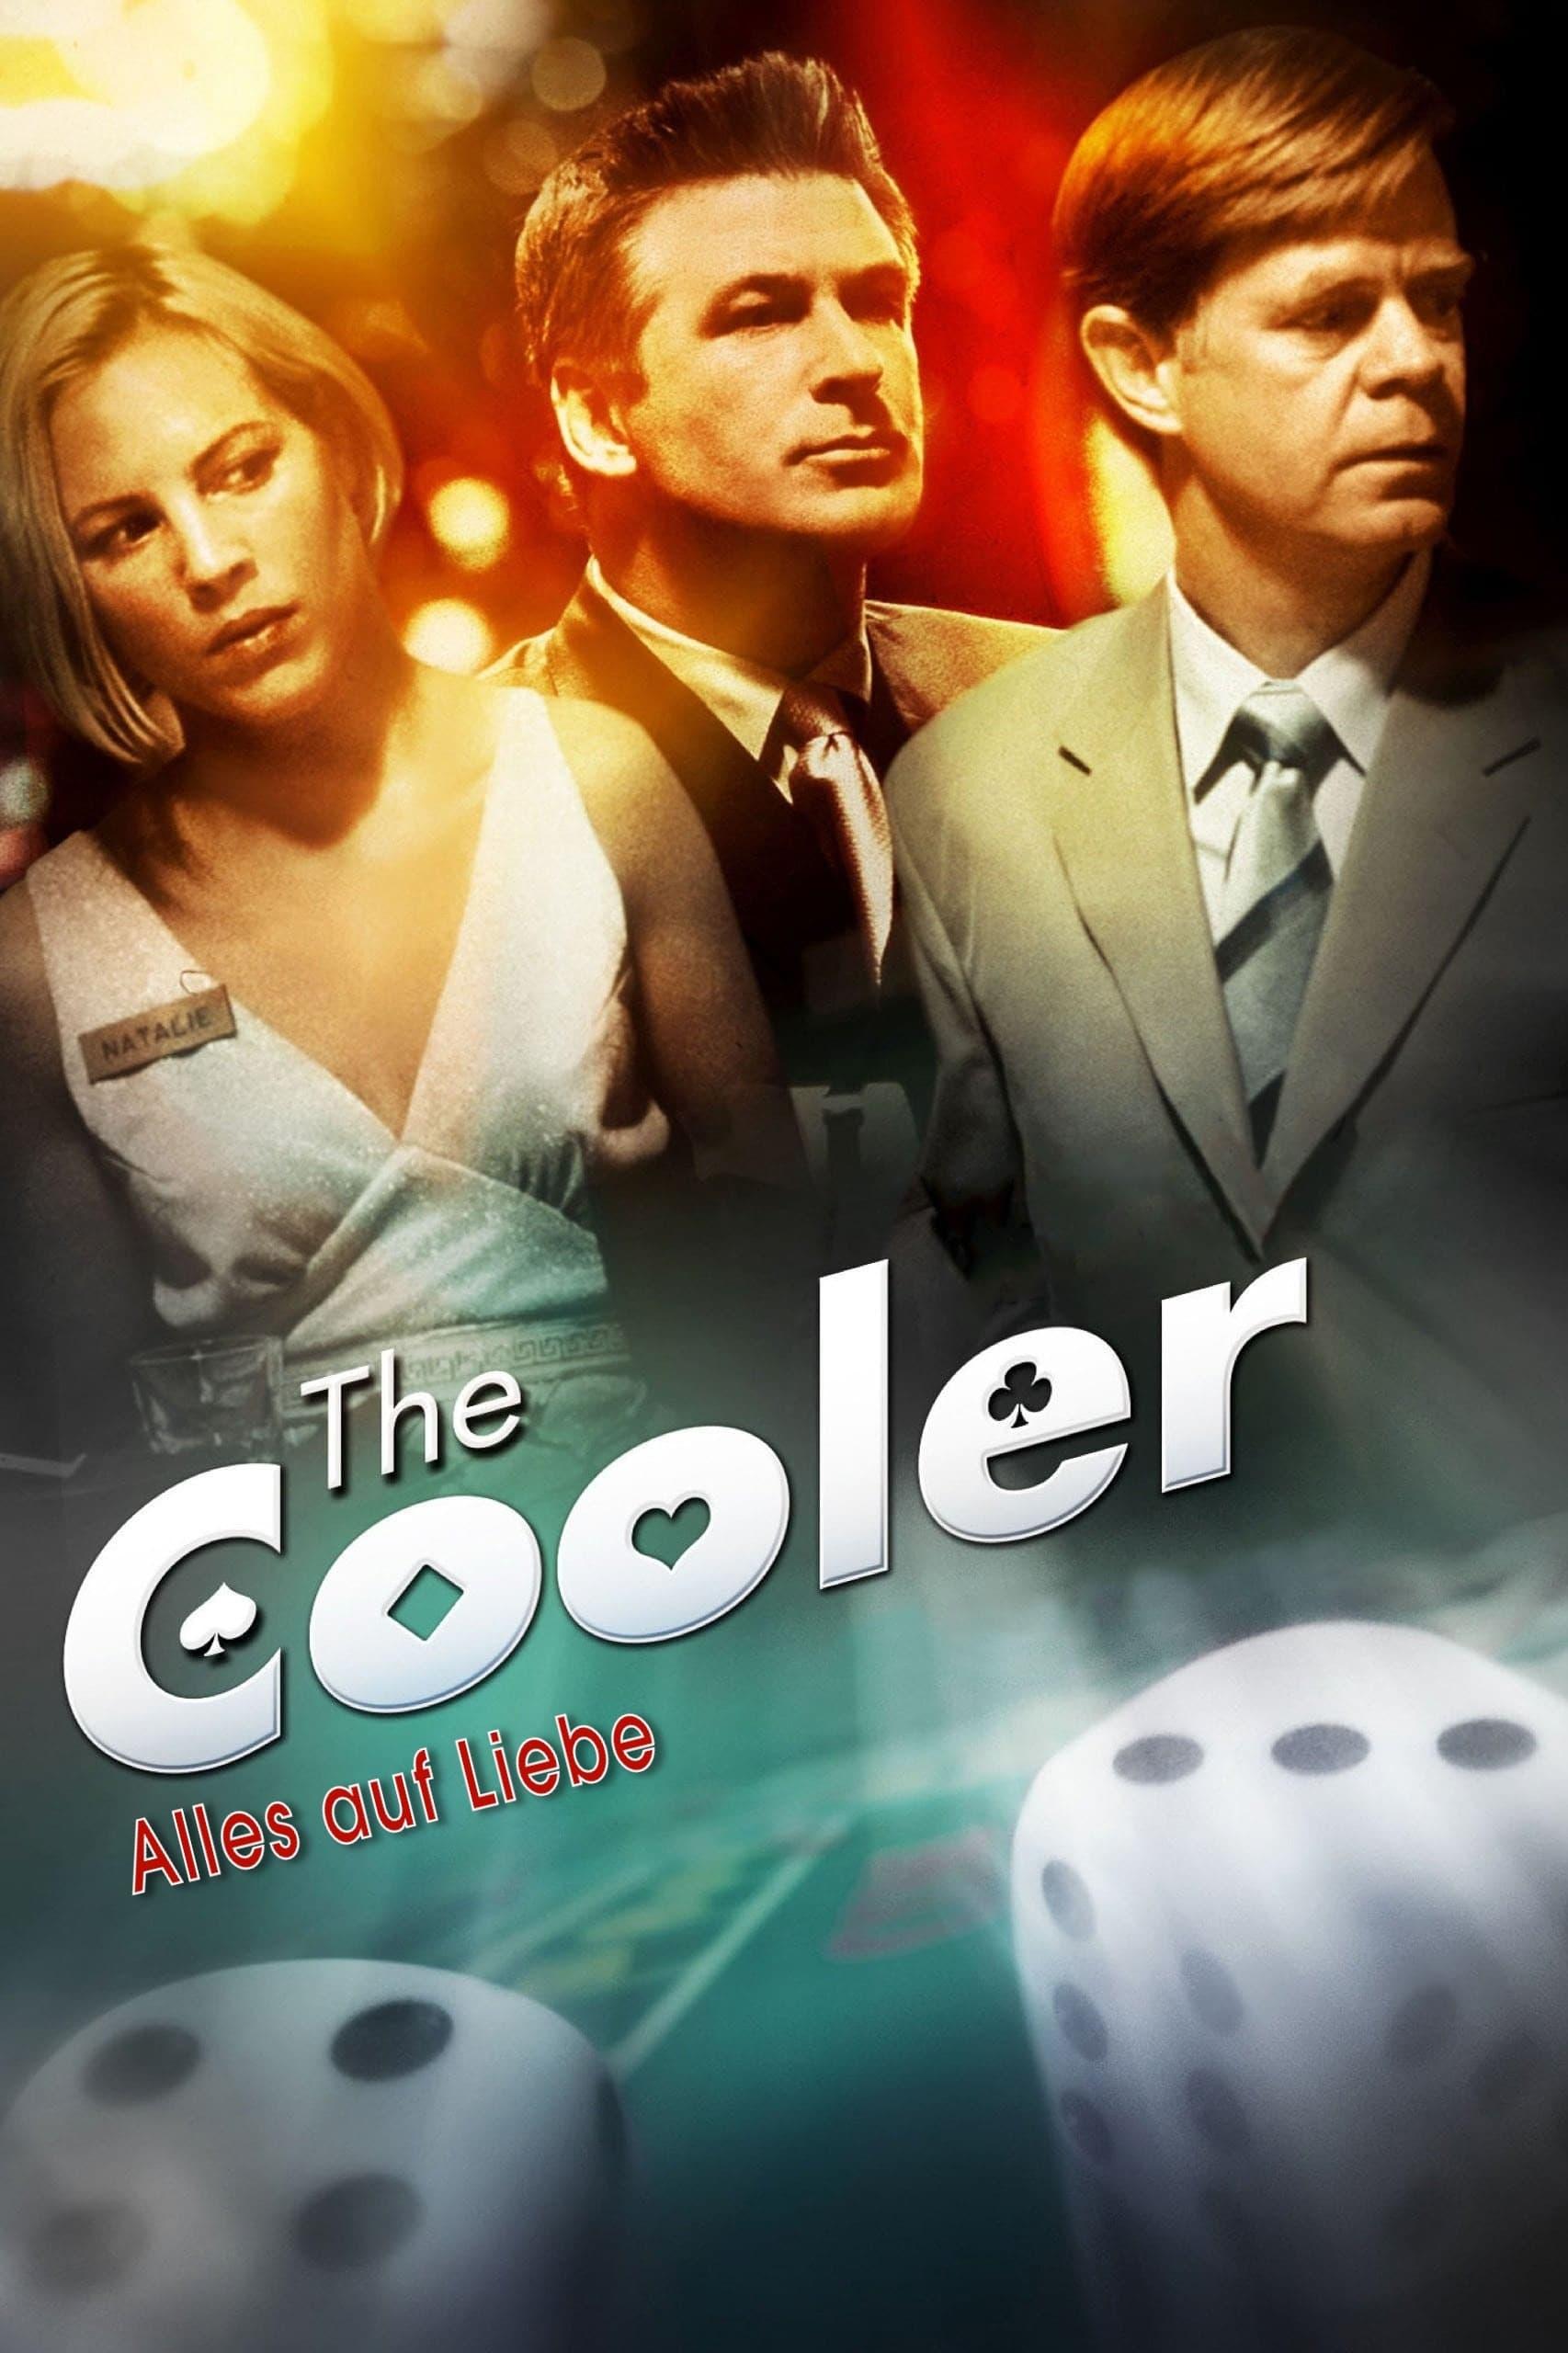 The Cooler - Alles auf Liebe poster